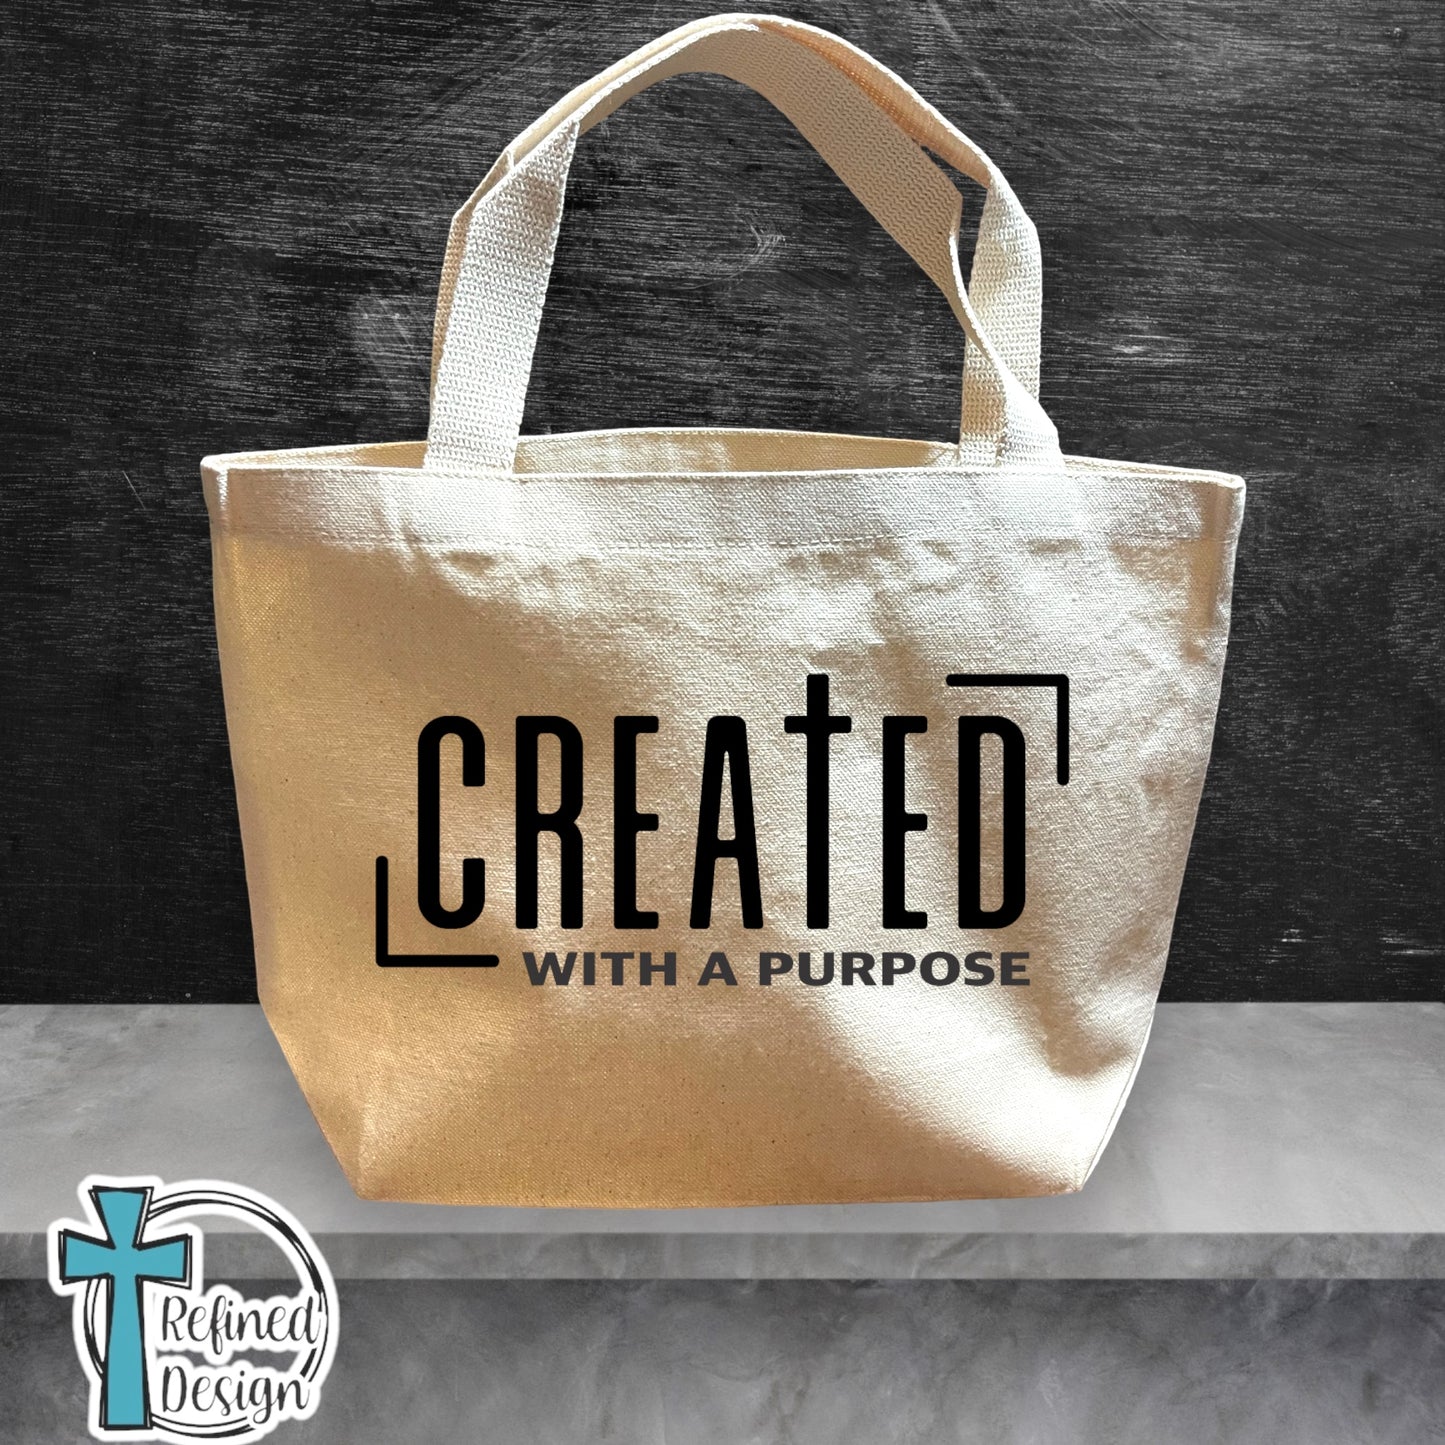 "Created With A Purpose" Bible Bag